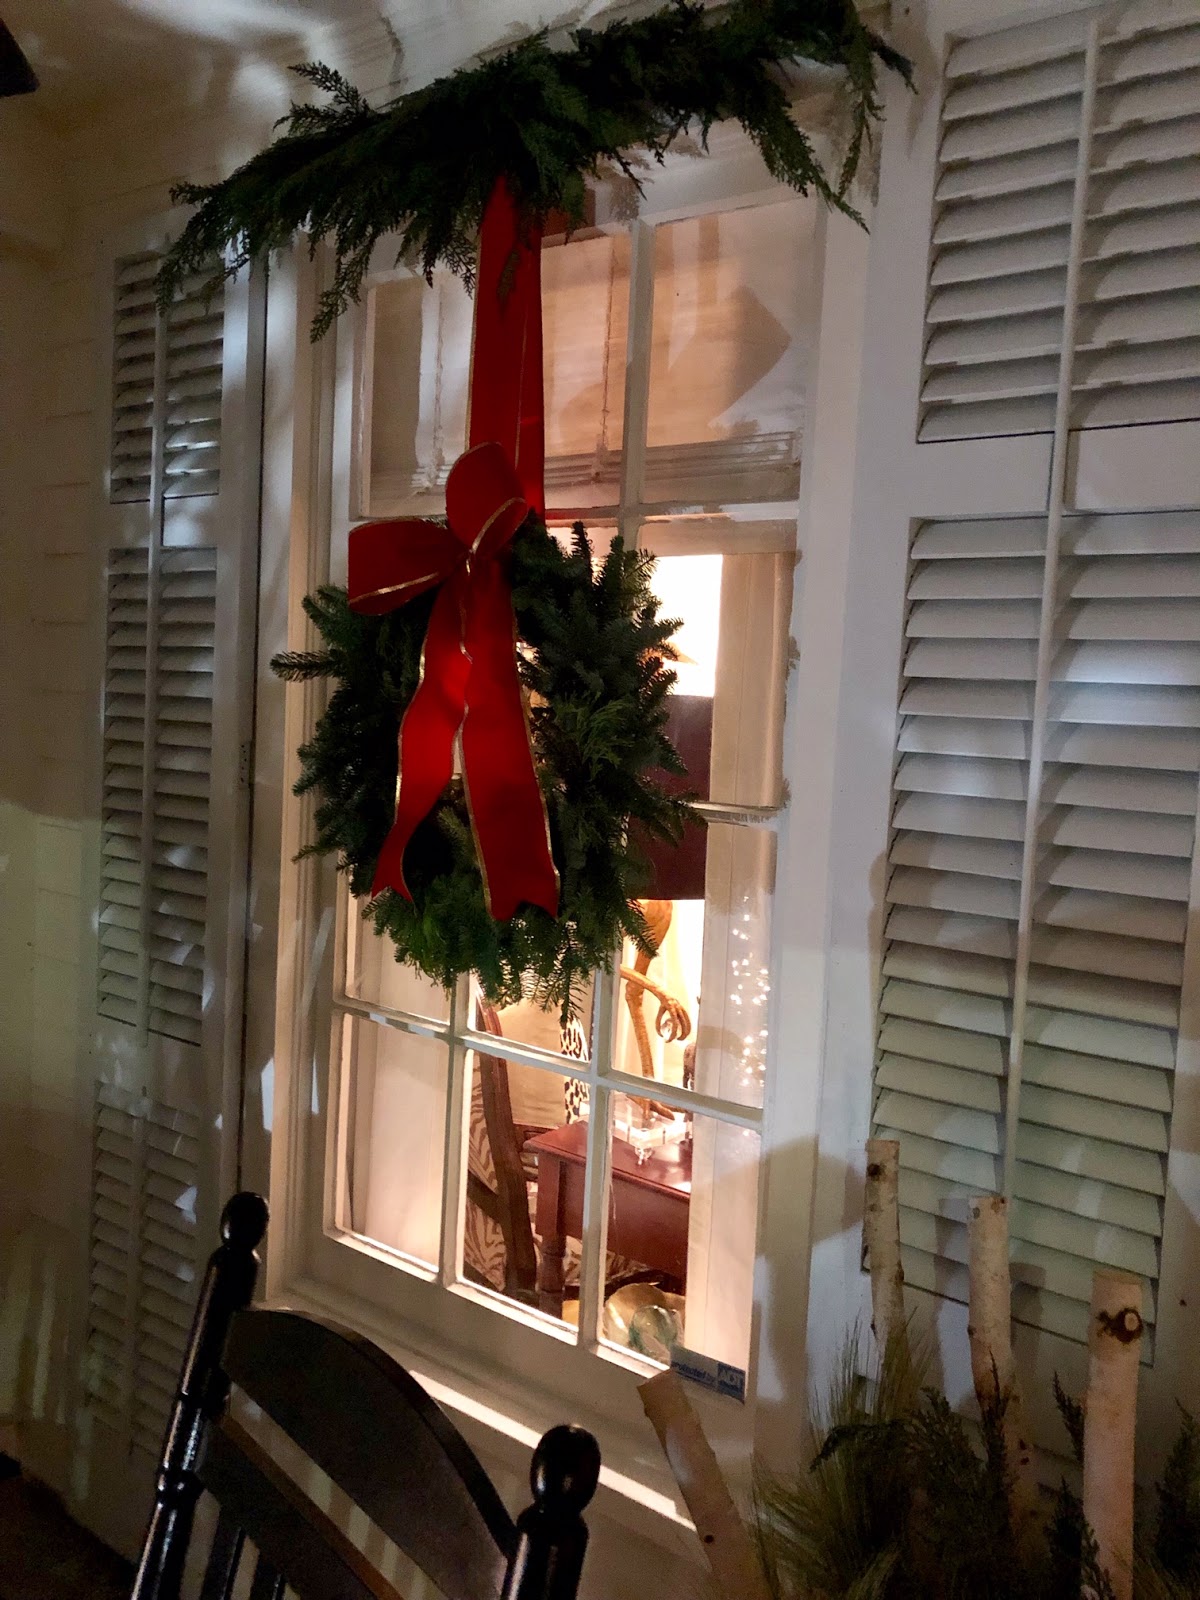 The Uptown Acorn: From Our Home to Yours {Christmas Facade at Night}